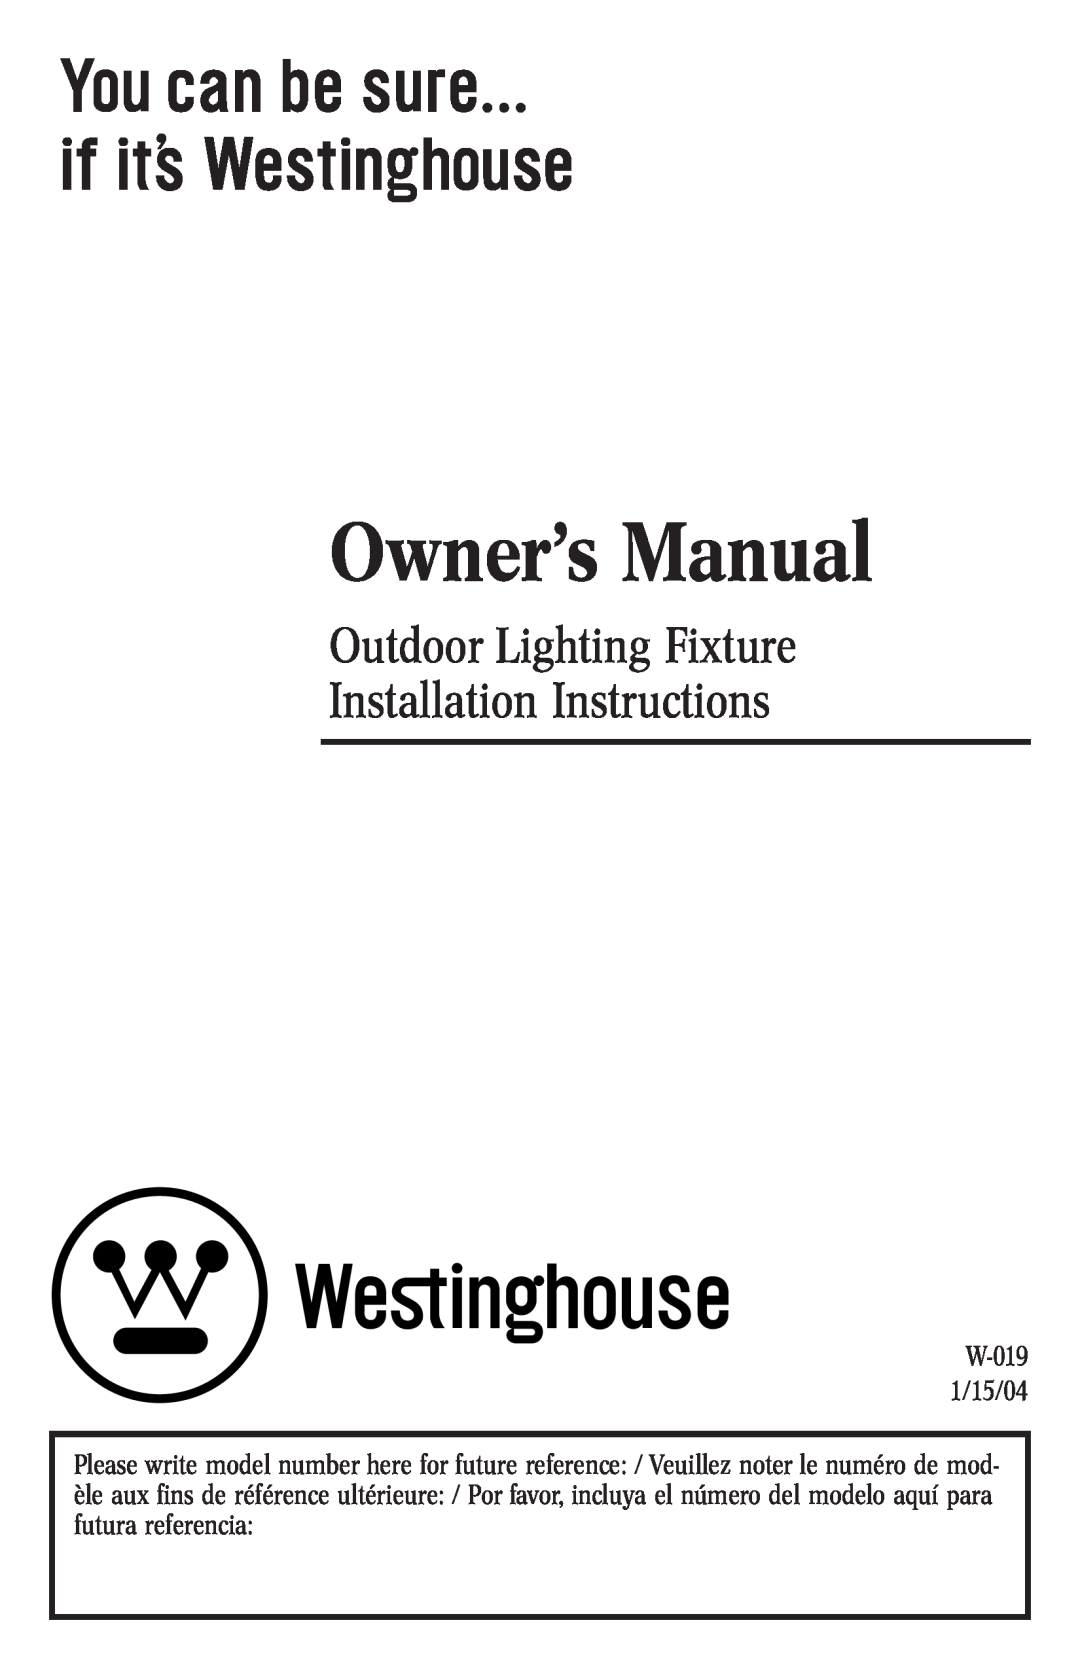 Westinghouse W-019 1/15/04 owner manual Outdoor Lighting Fixture Installation Instructions 